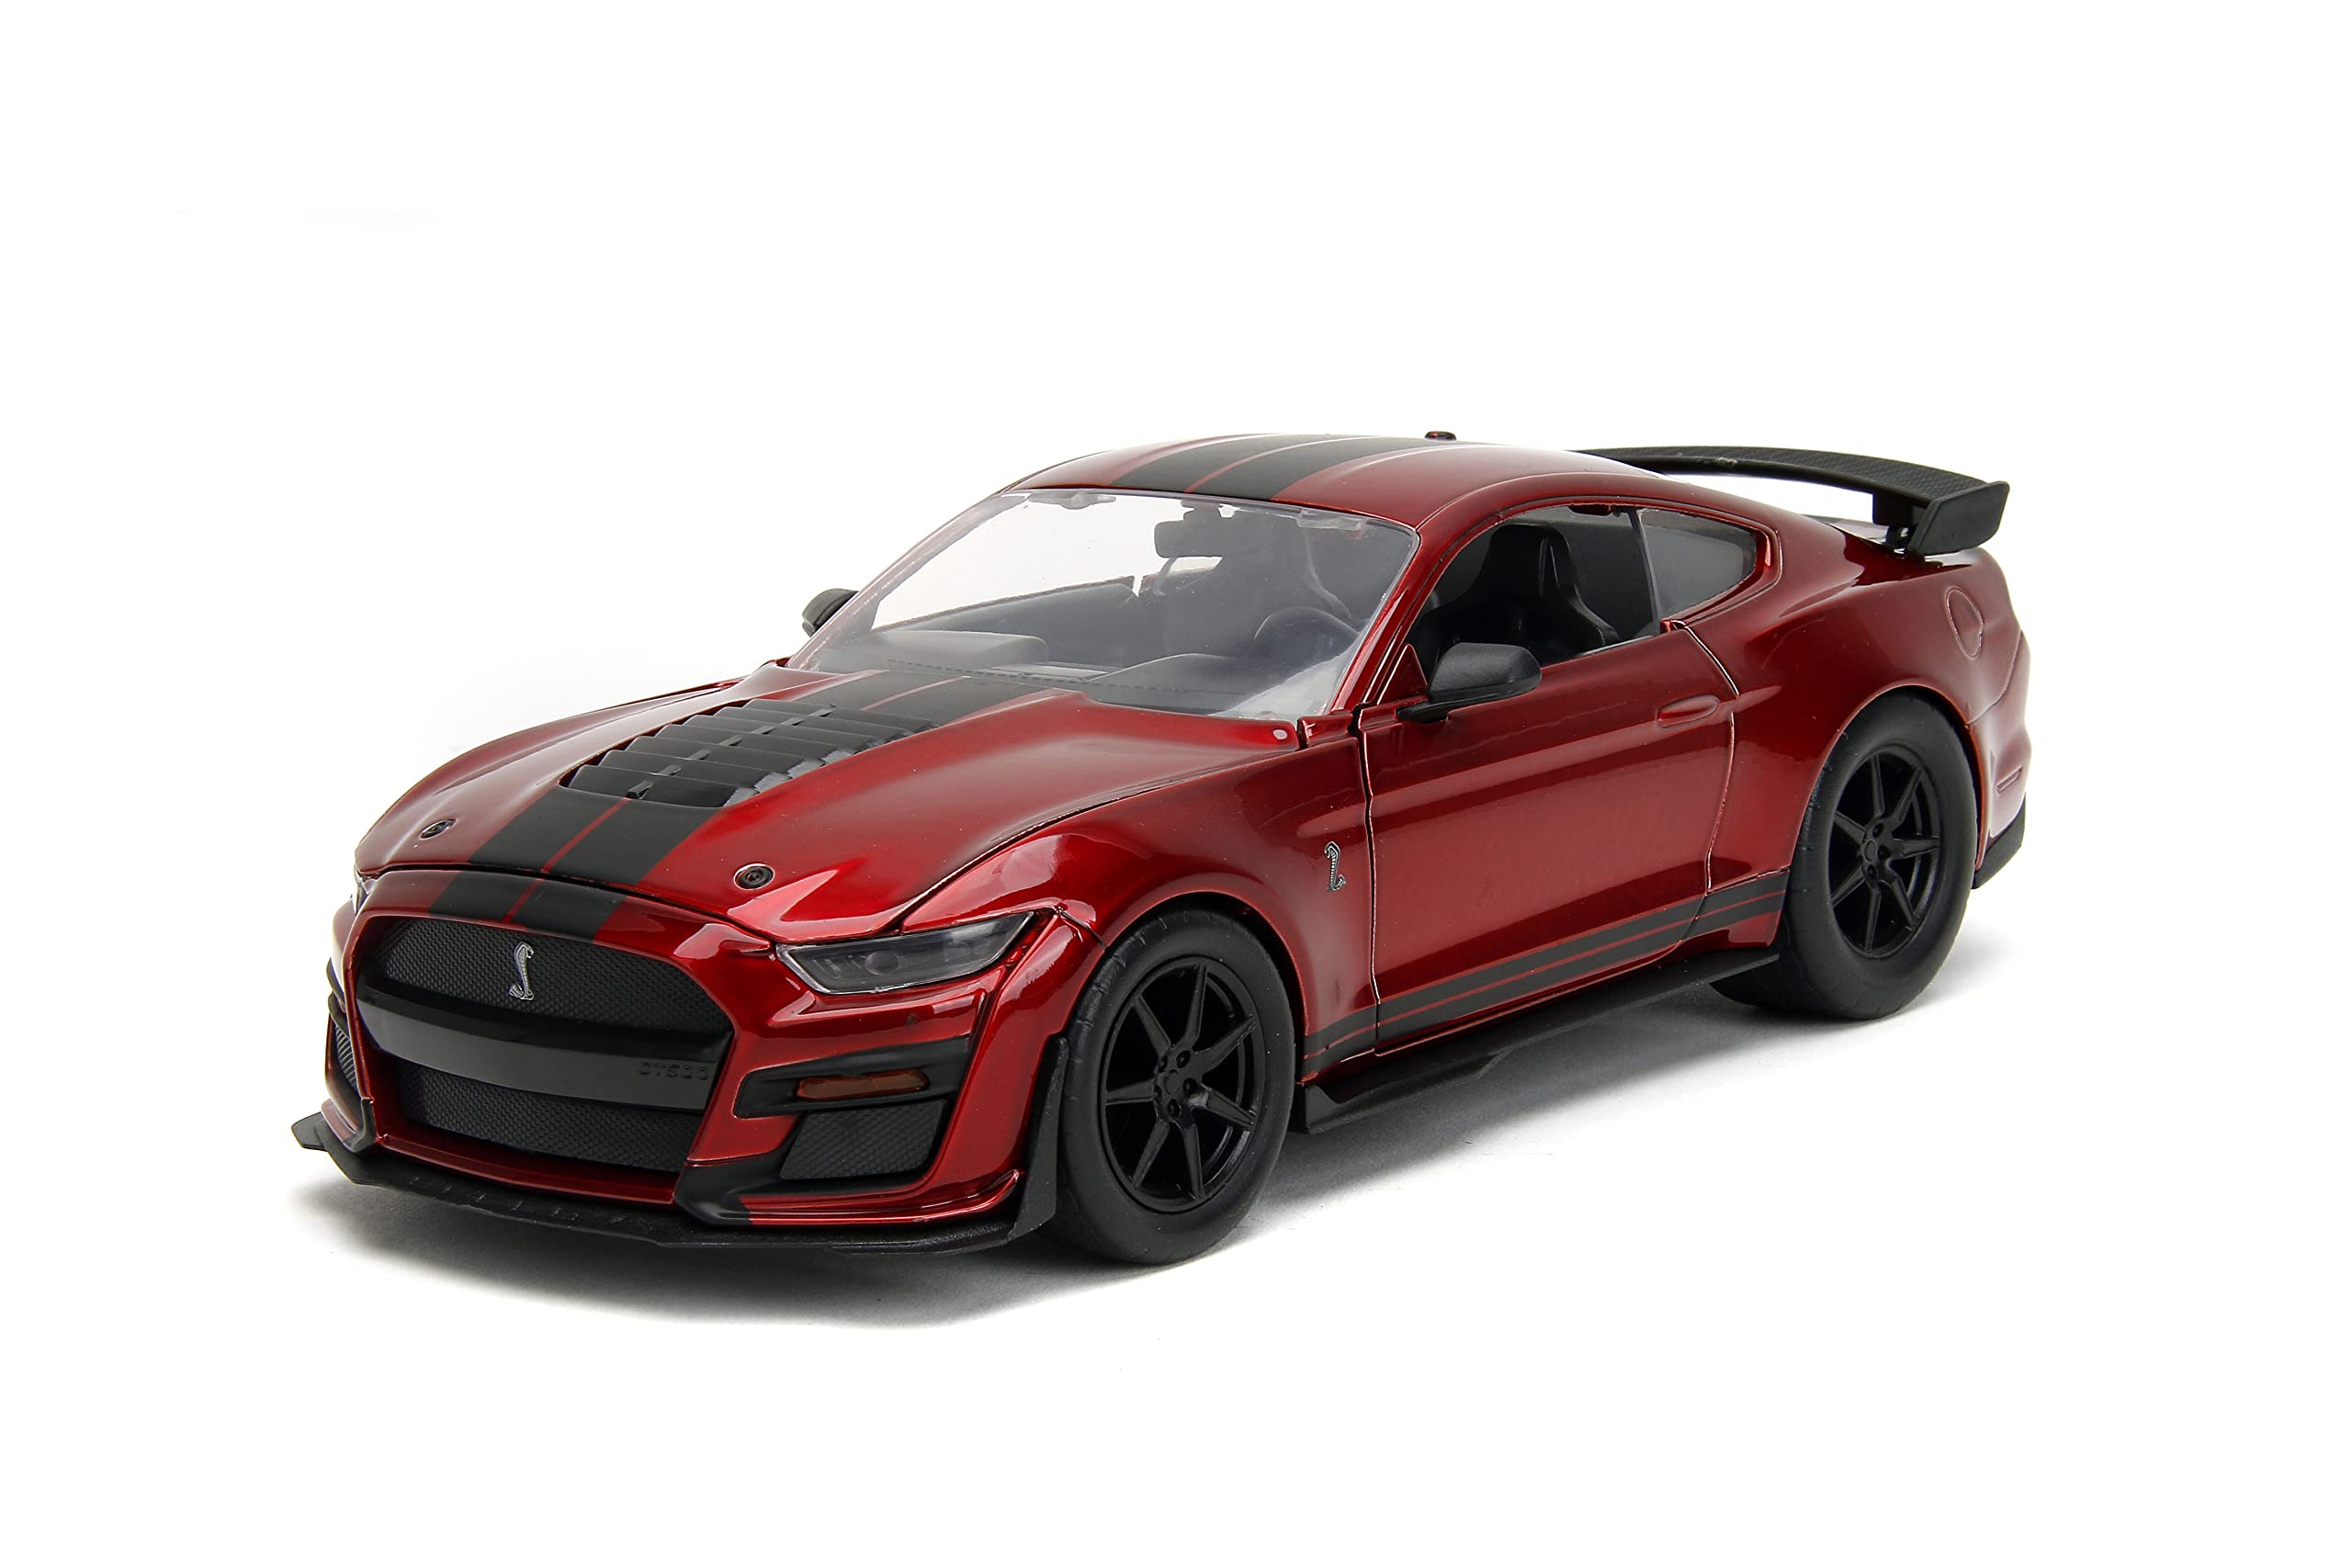 Big Time Muscle 1:24 2020 Ford Mustang Shelby GT 500 Die-cast Car Candy Red, Toys for Kids and Adults